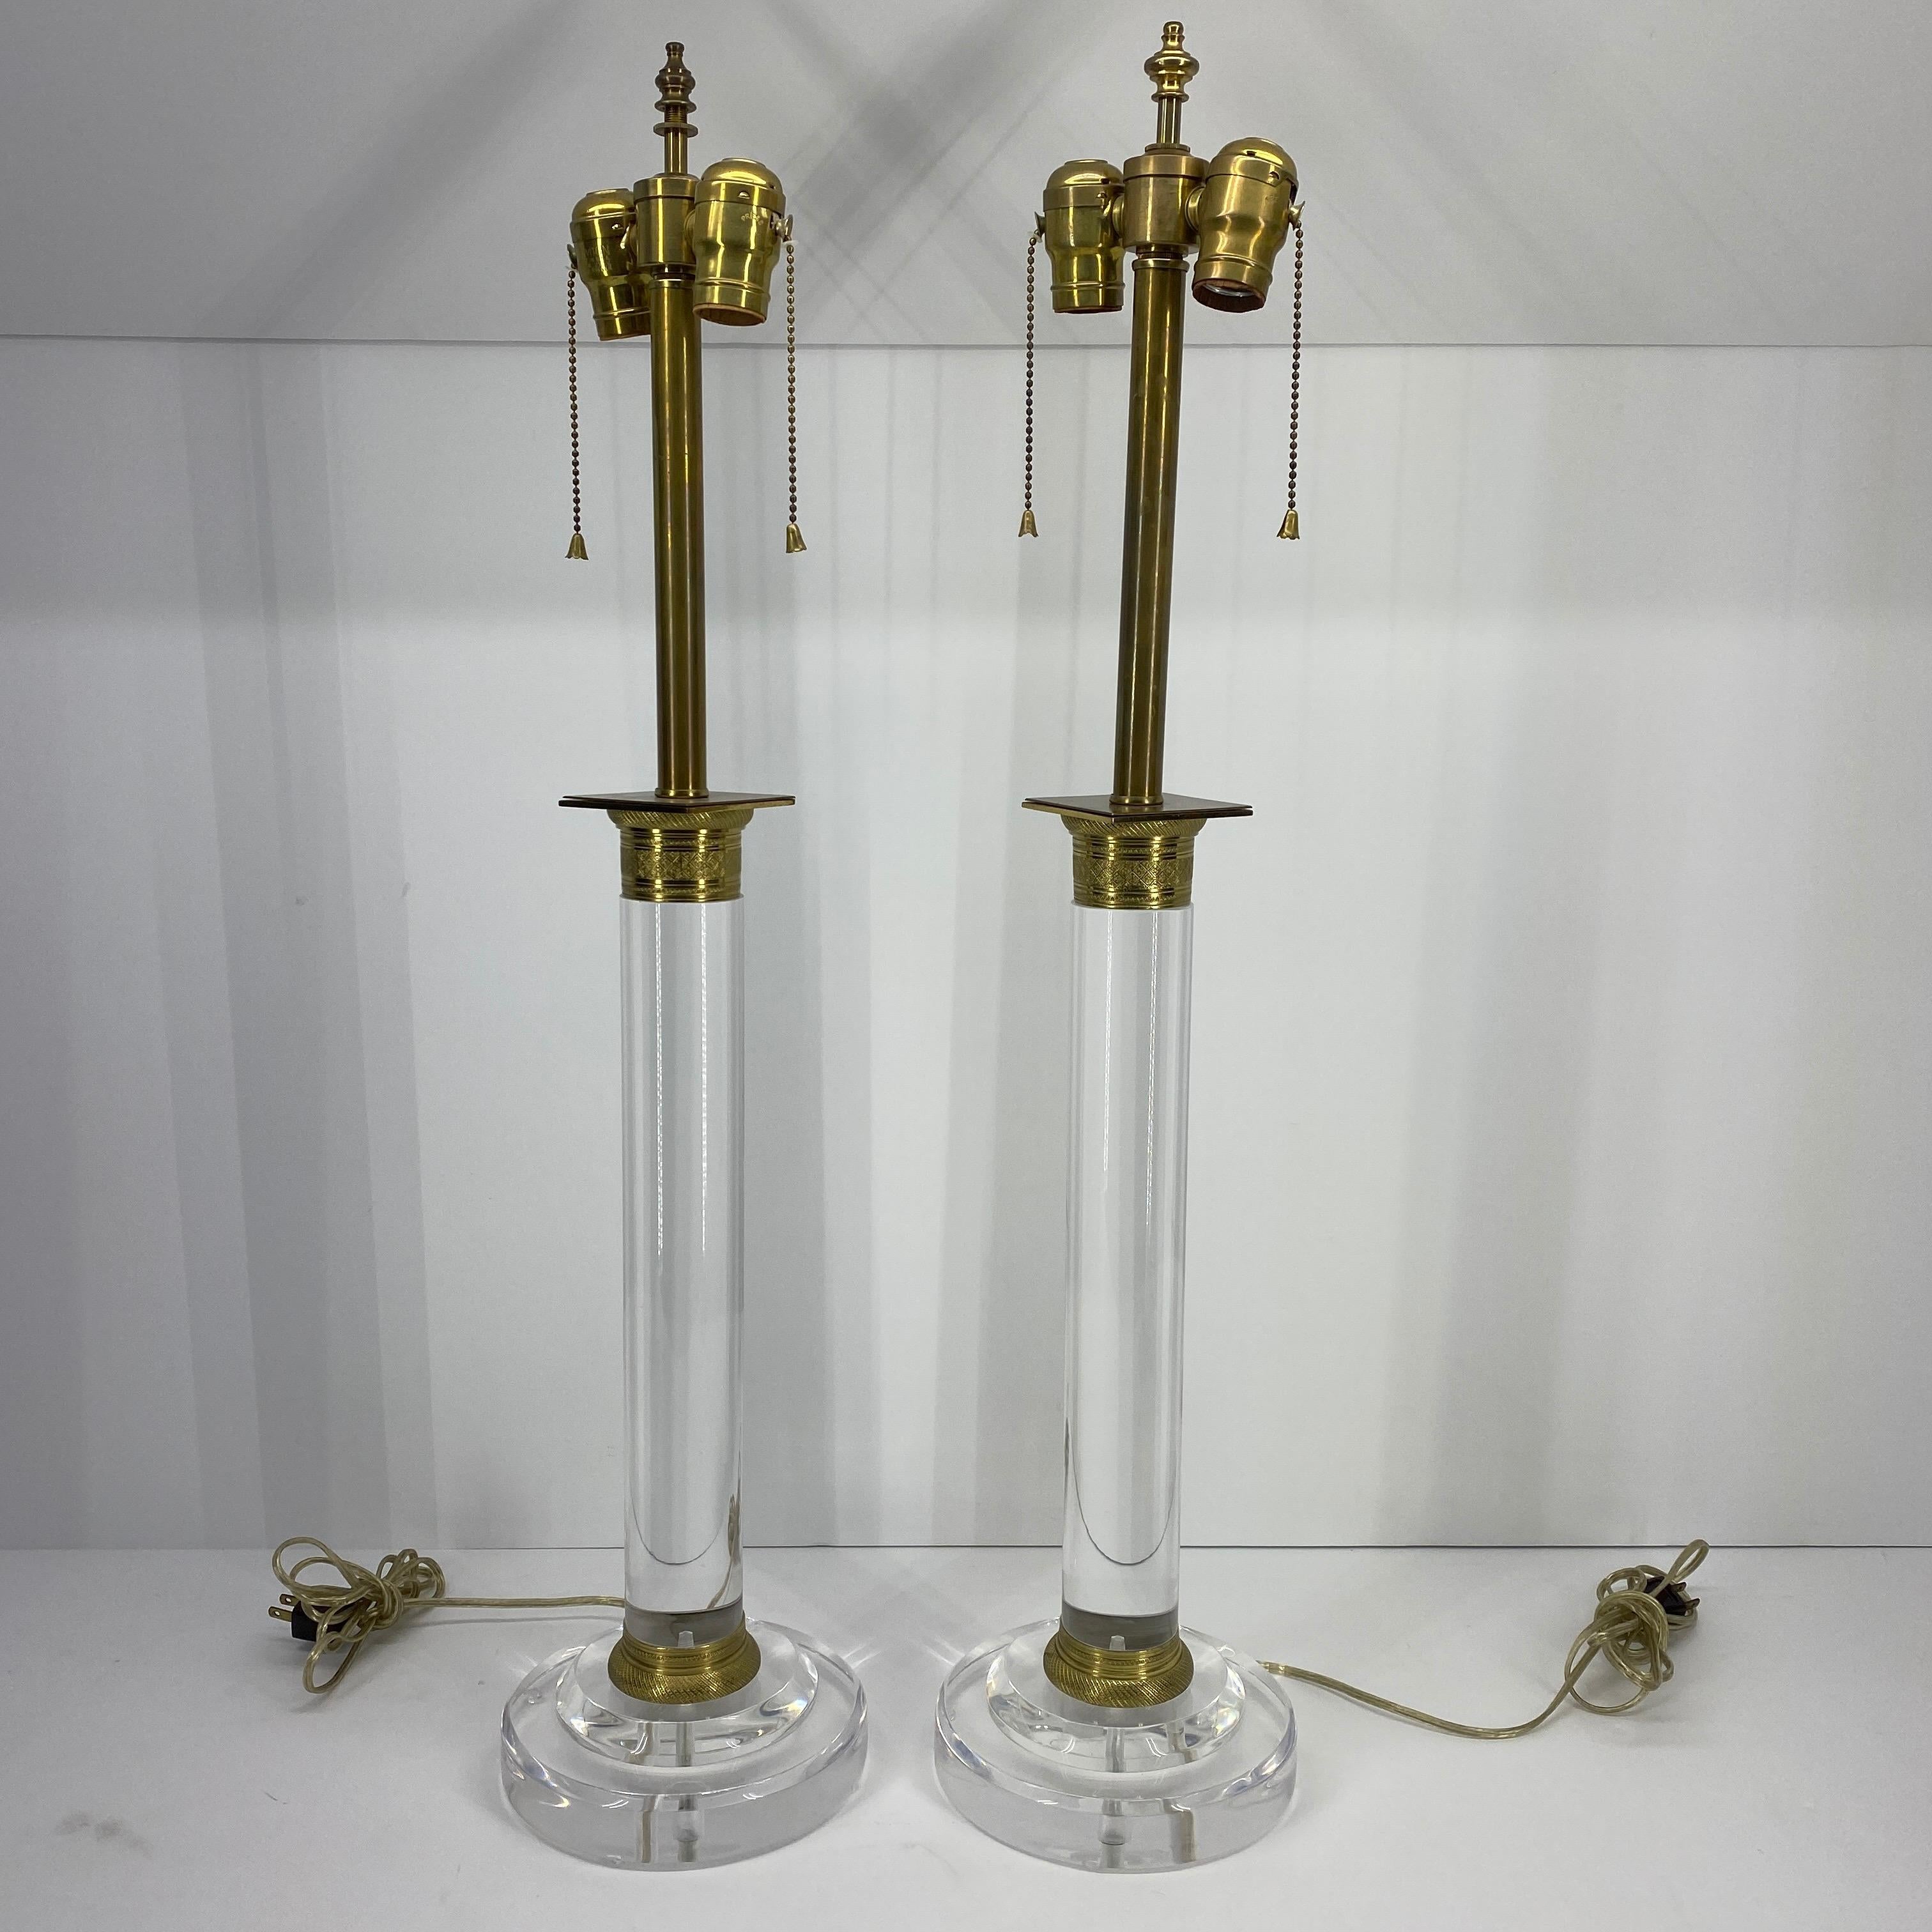 Pair of Mid-Century Modern Lucite and Bronze Table Lamps In Good Condition For Sale In Haddonfield, NJ